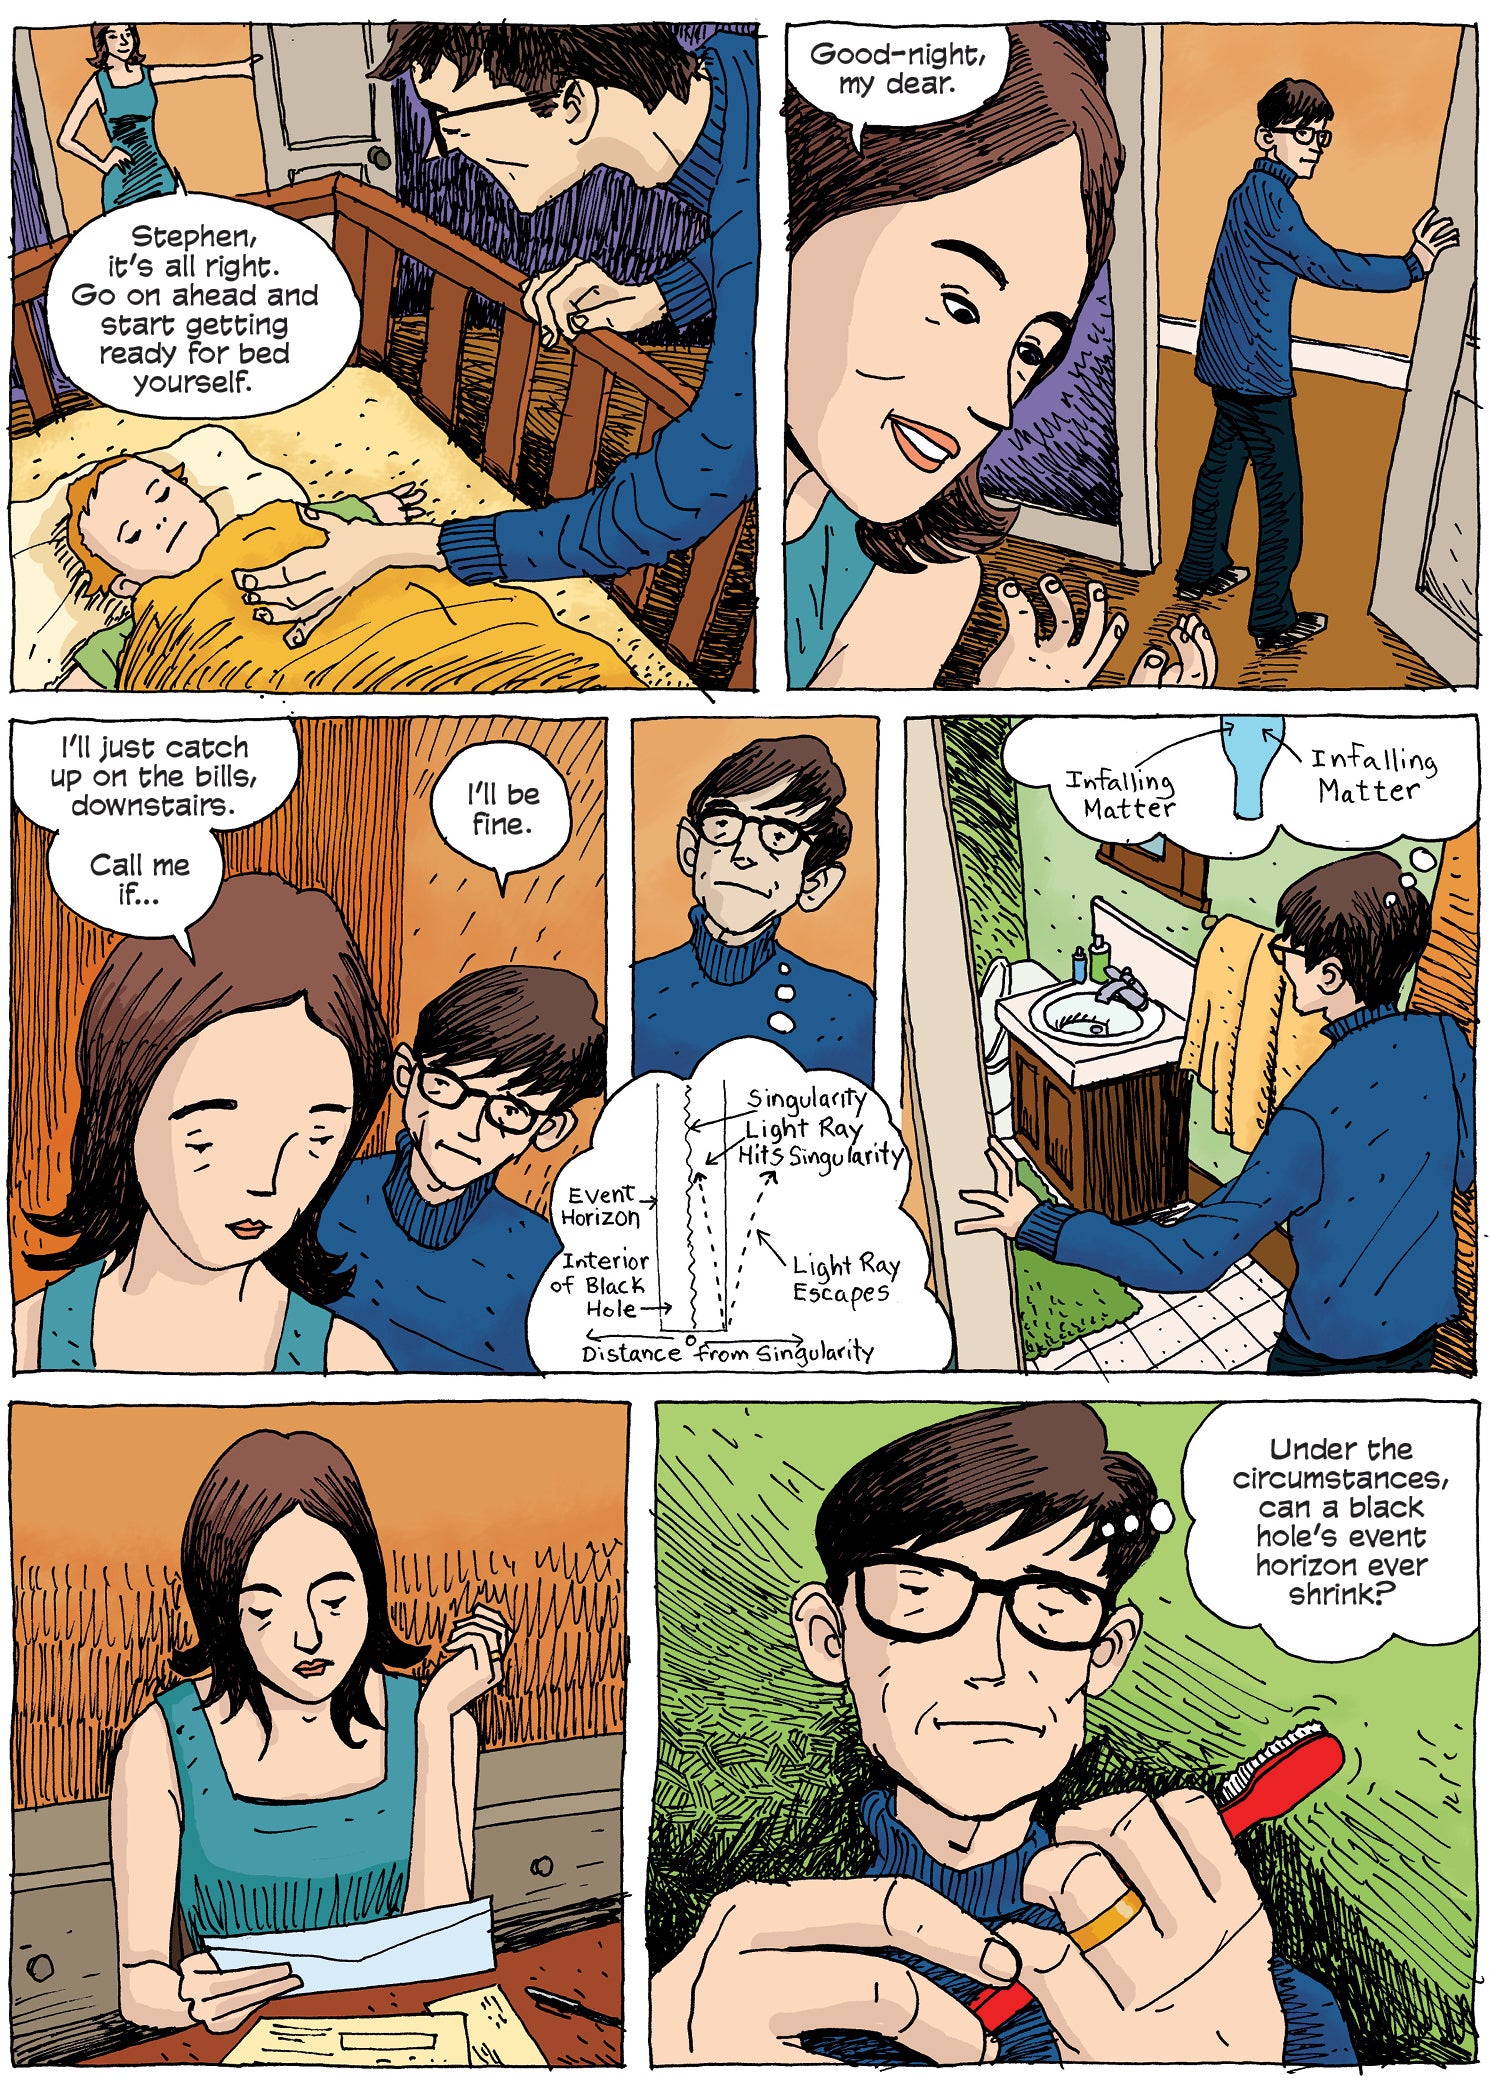 Stephen Hawking's Graphic Novel Biography Shows How He Saw The World